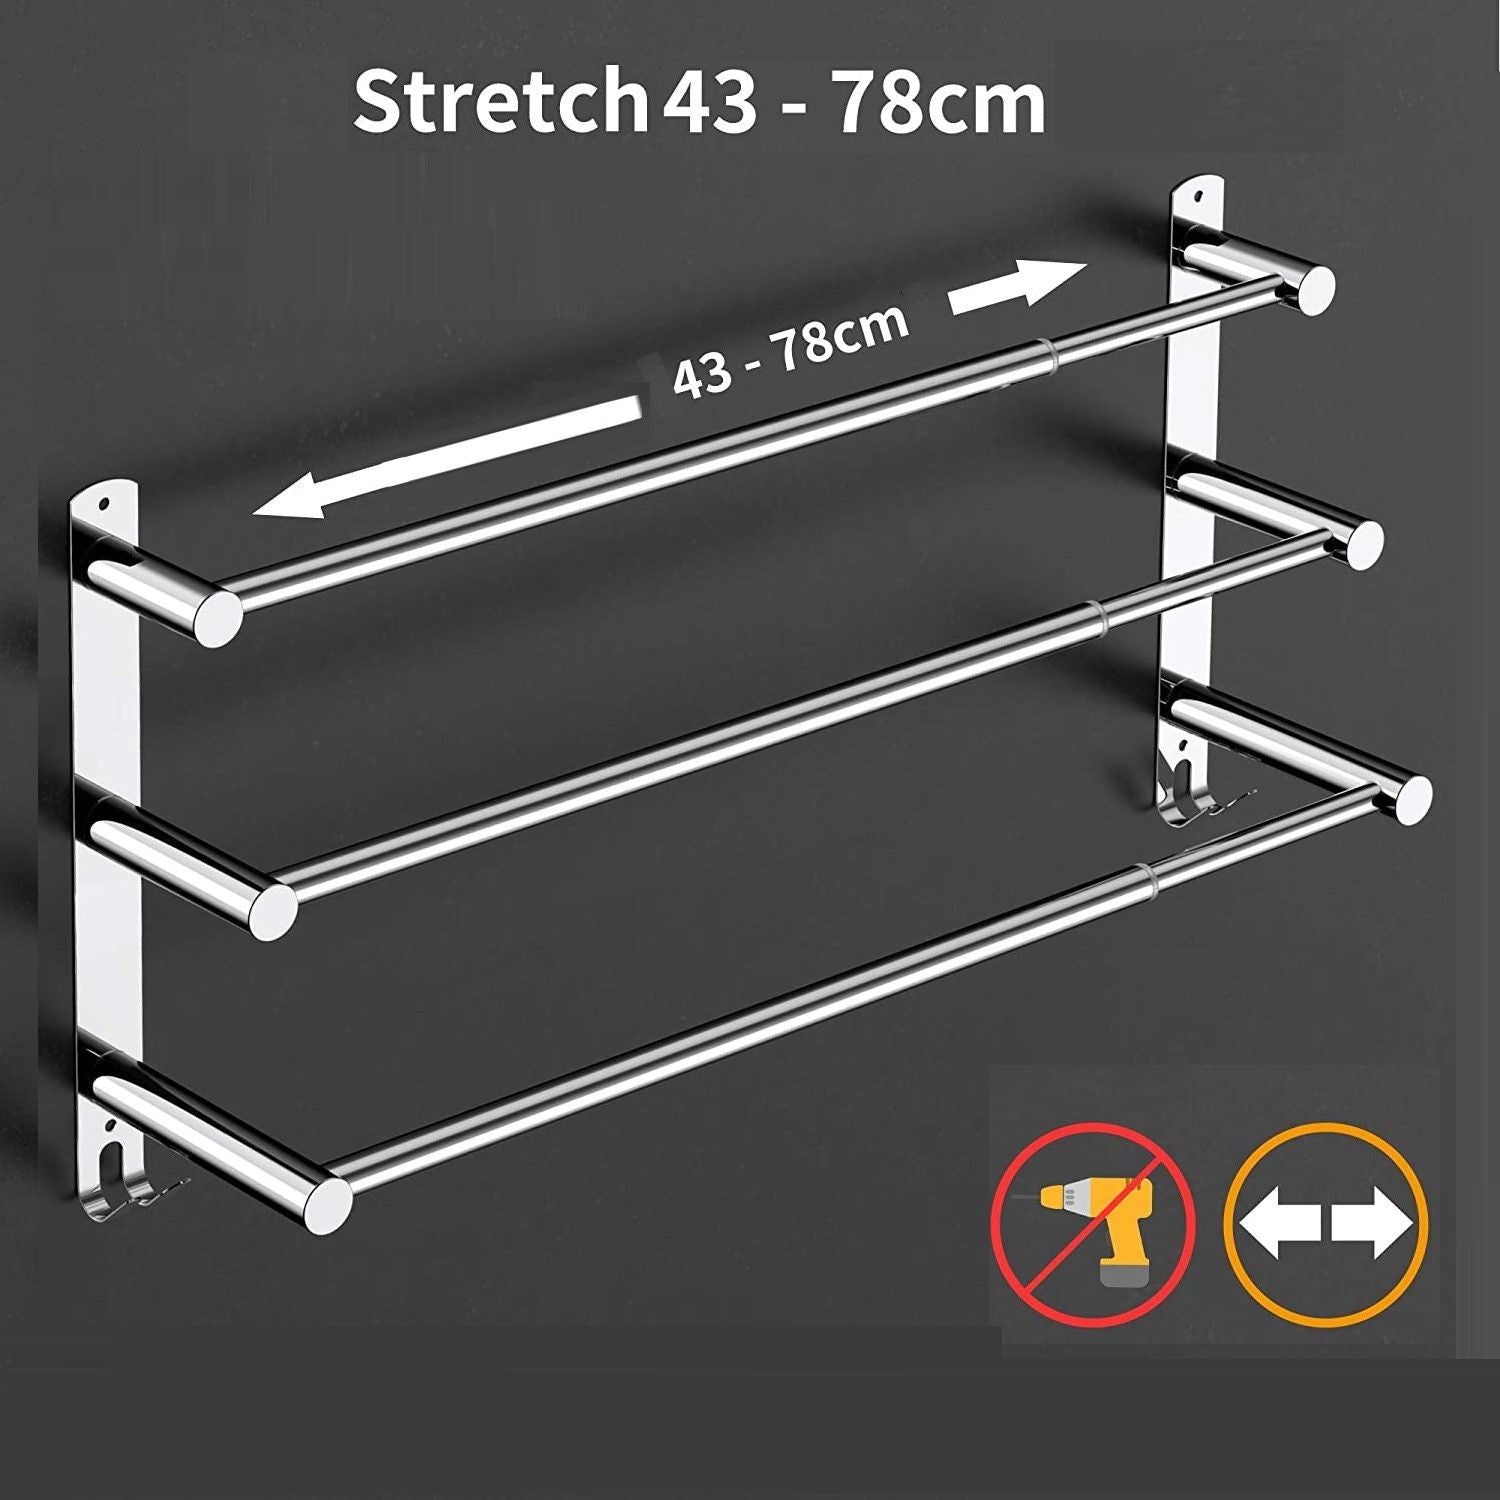 Stretchable 45-75 cm Towel Bar for Bathroom and Kitchen (Three Bars) - 0